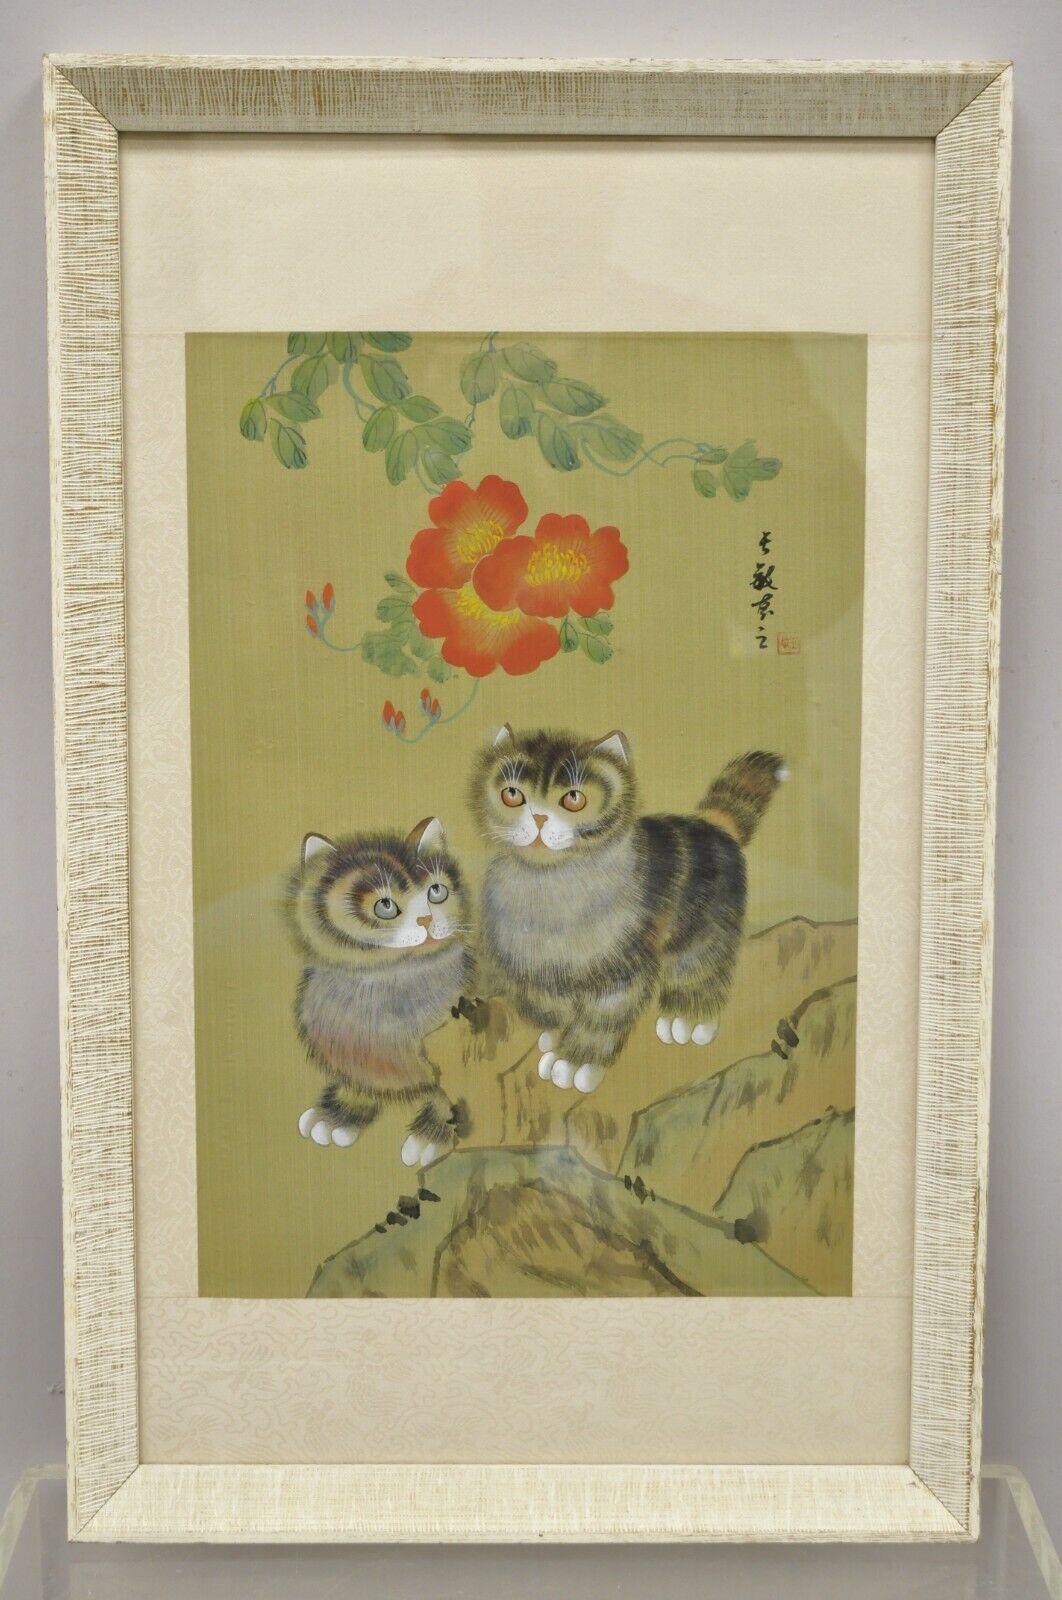 Vintage Chinese Watercolor silkscreen Framed Painting of Cats and Flowers. Circa Mid to late 20th Century. Measurements: 21.5